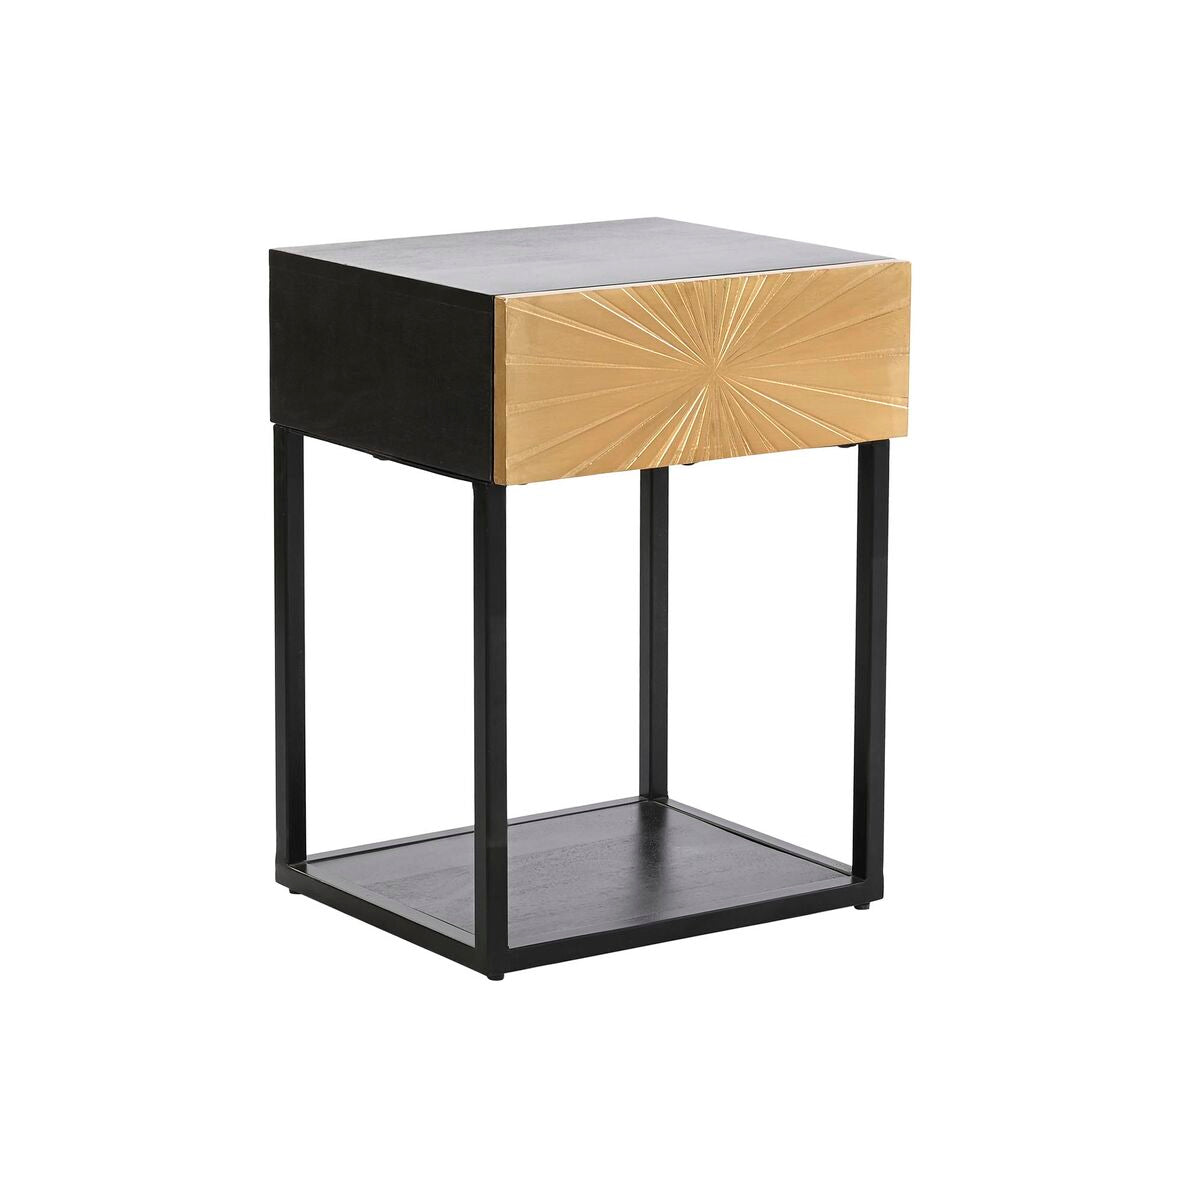 Black Bedside Table with Golden Drawer (35 x 40 x 55 cm)